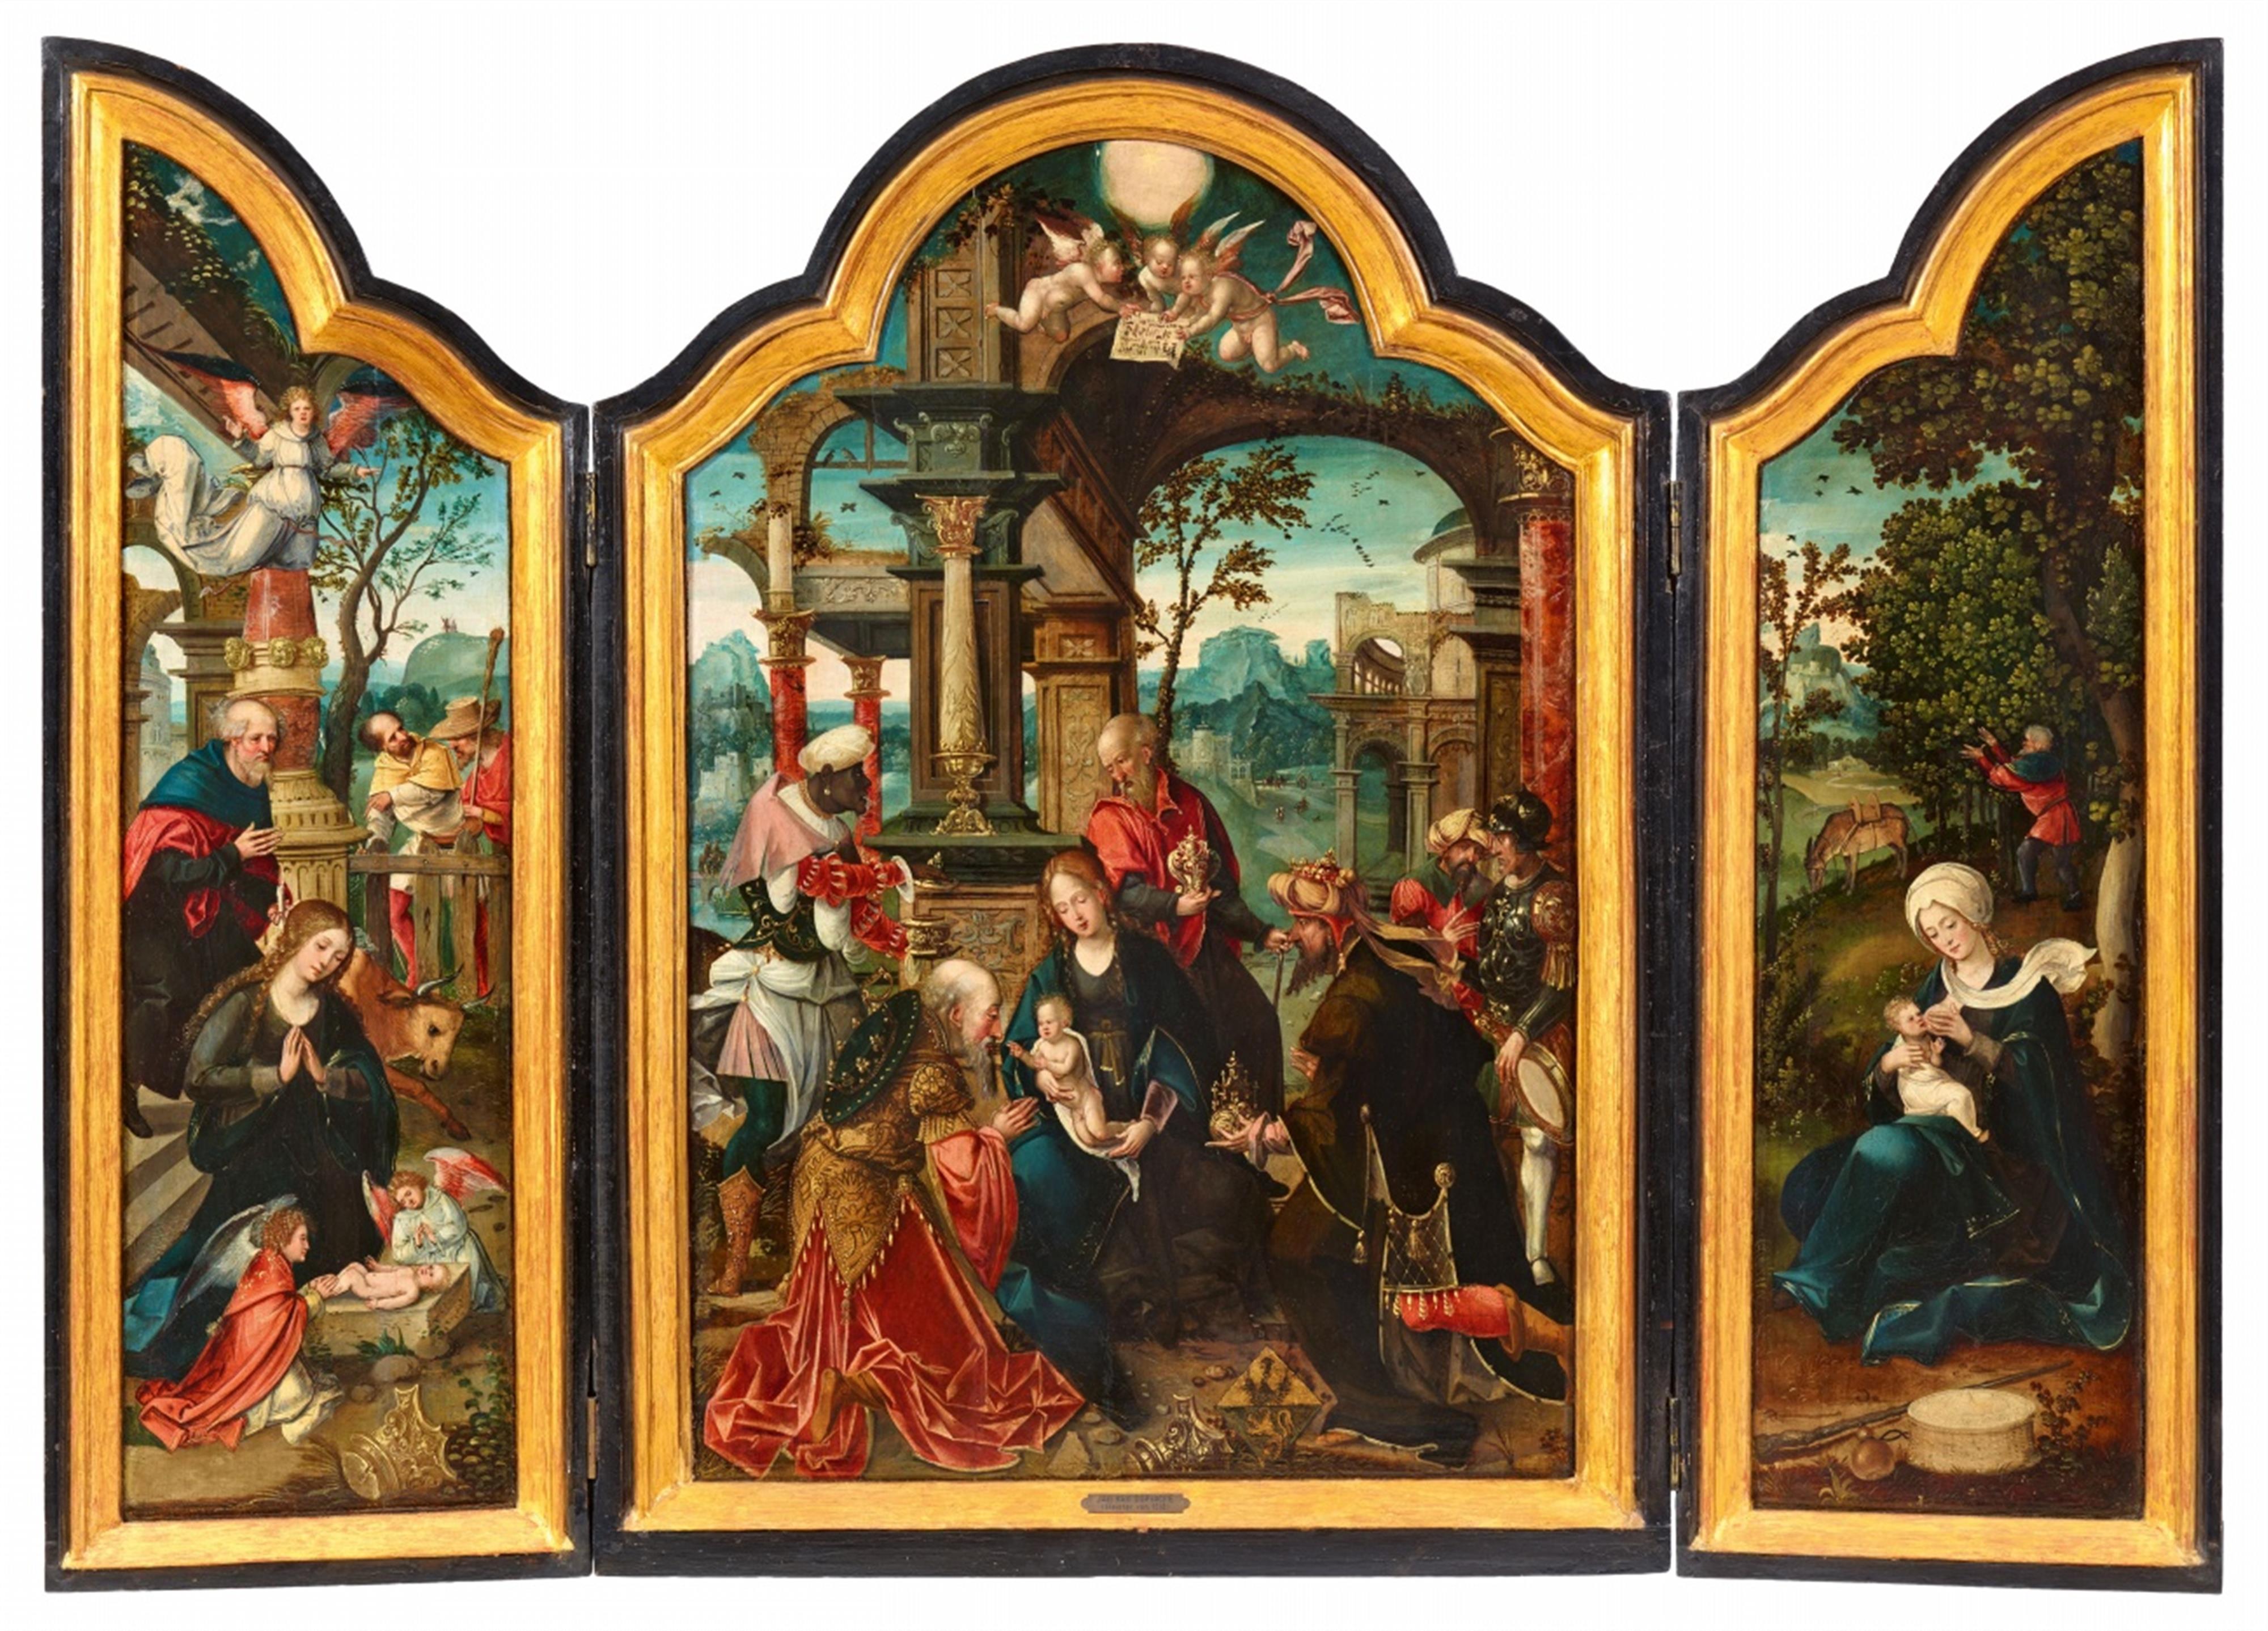 Jan van Dornicke, called Master of 1518 and studio - Triptych with the Adoration of the Magi, Adoration of the Shepherds, and the Flight into Egypt - image-1